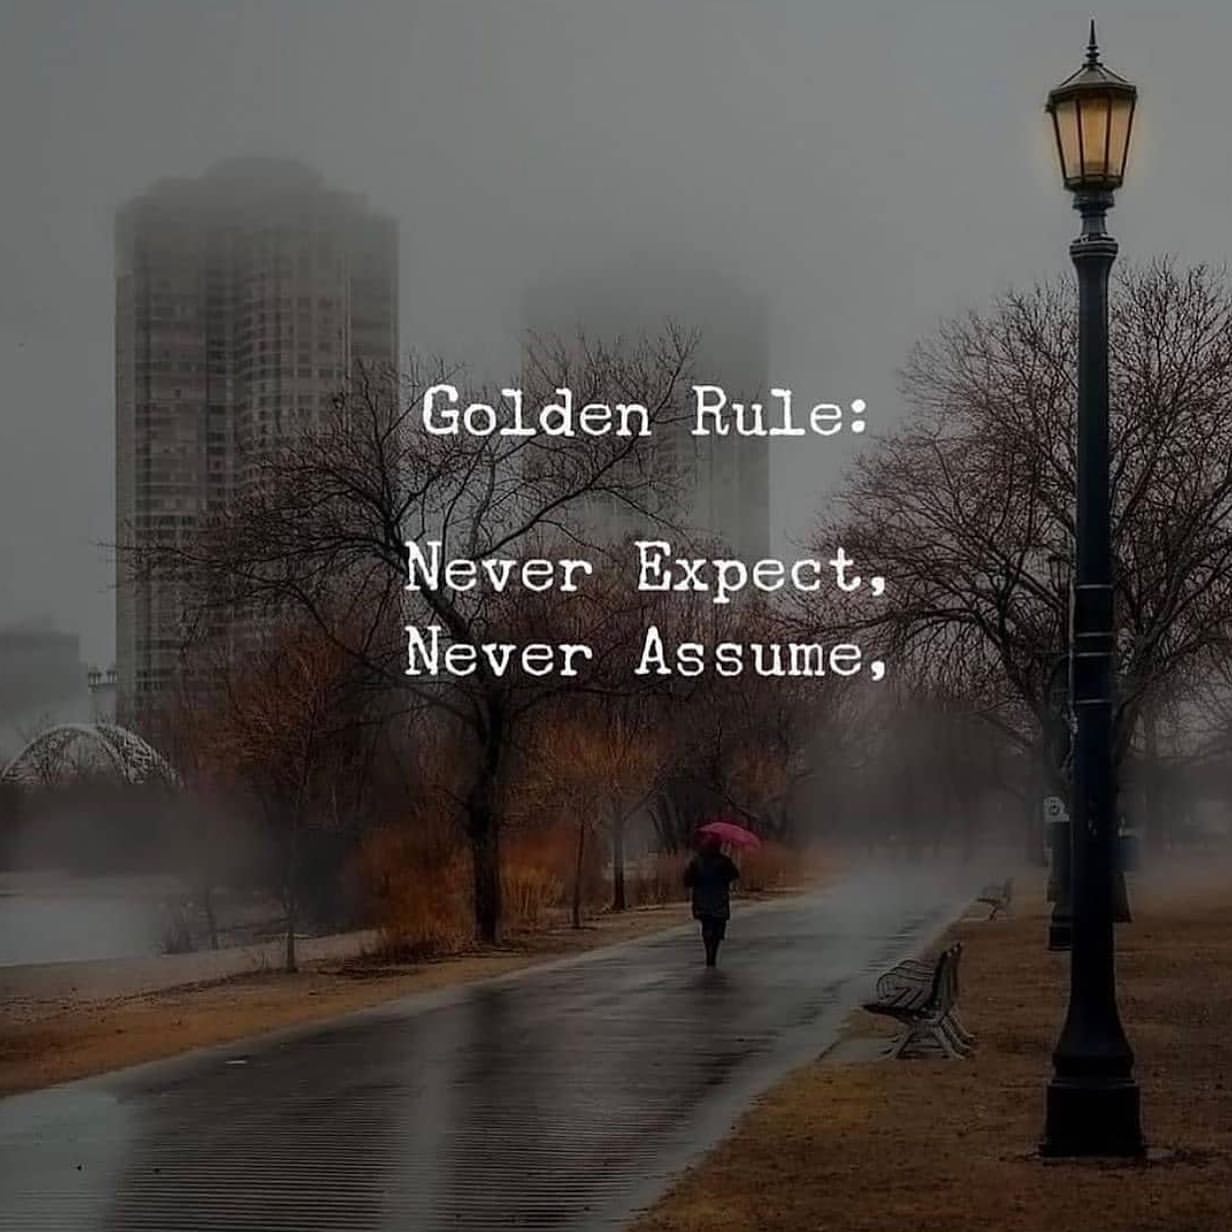 Golden Rule: Never Expect, Never Assume.